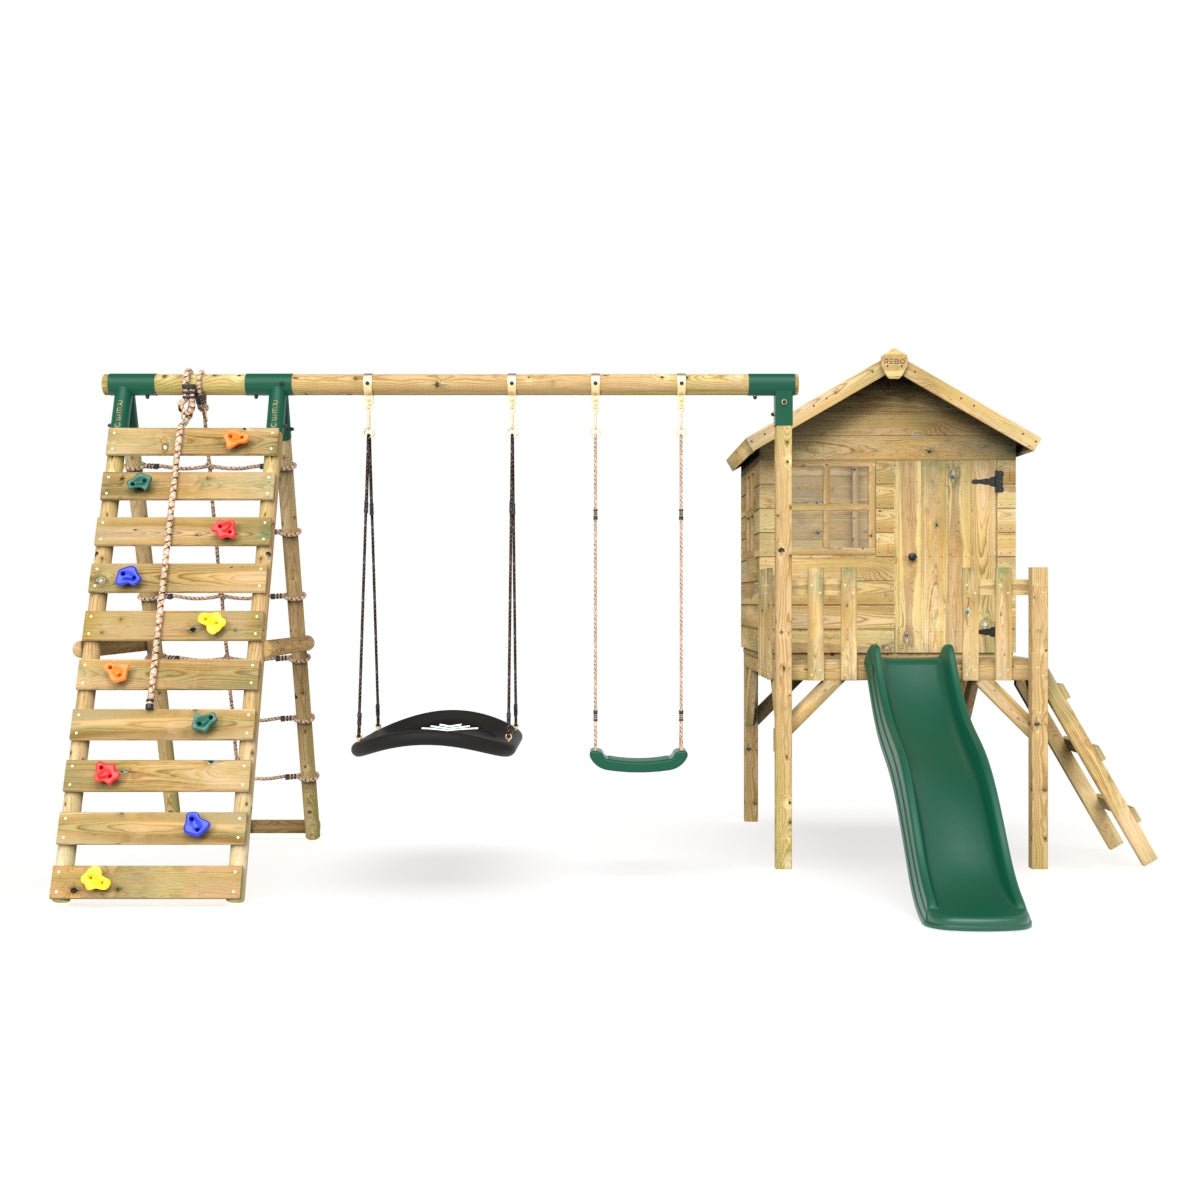 Rebo Orchard 4FT Wooden Playhouse + Swings, Rock Wall, Deck & 6FT Slide – Sage Green